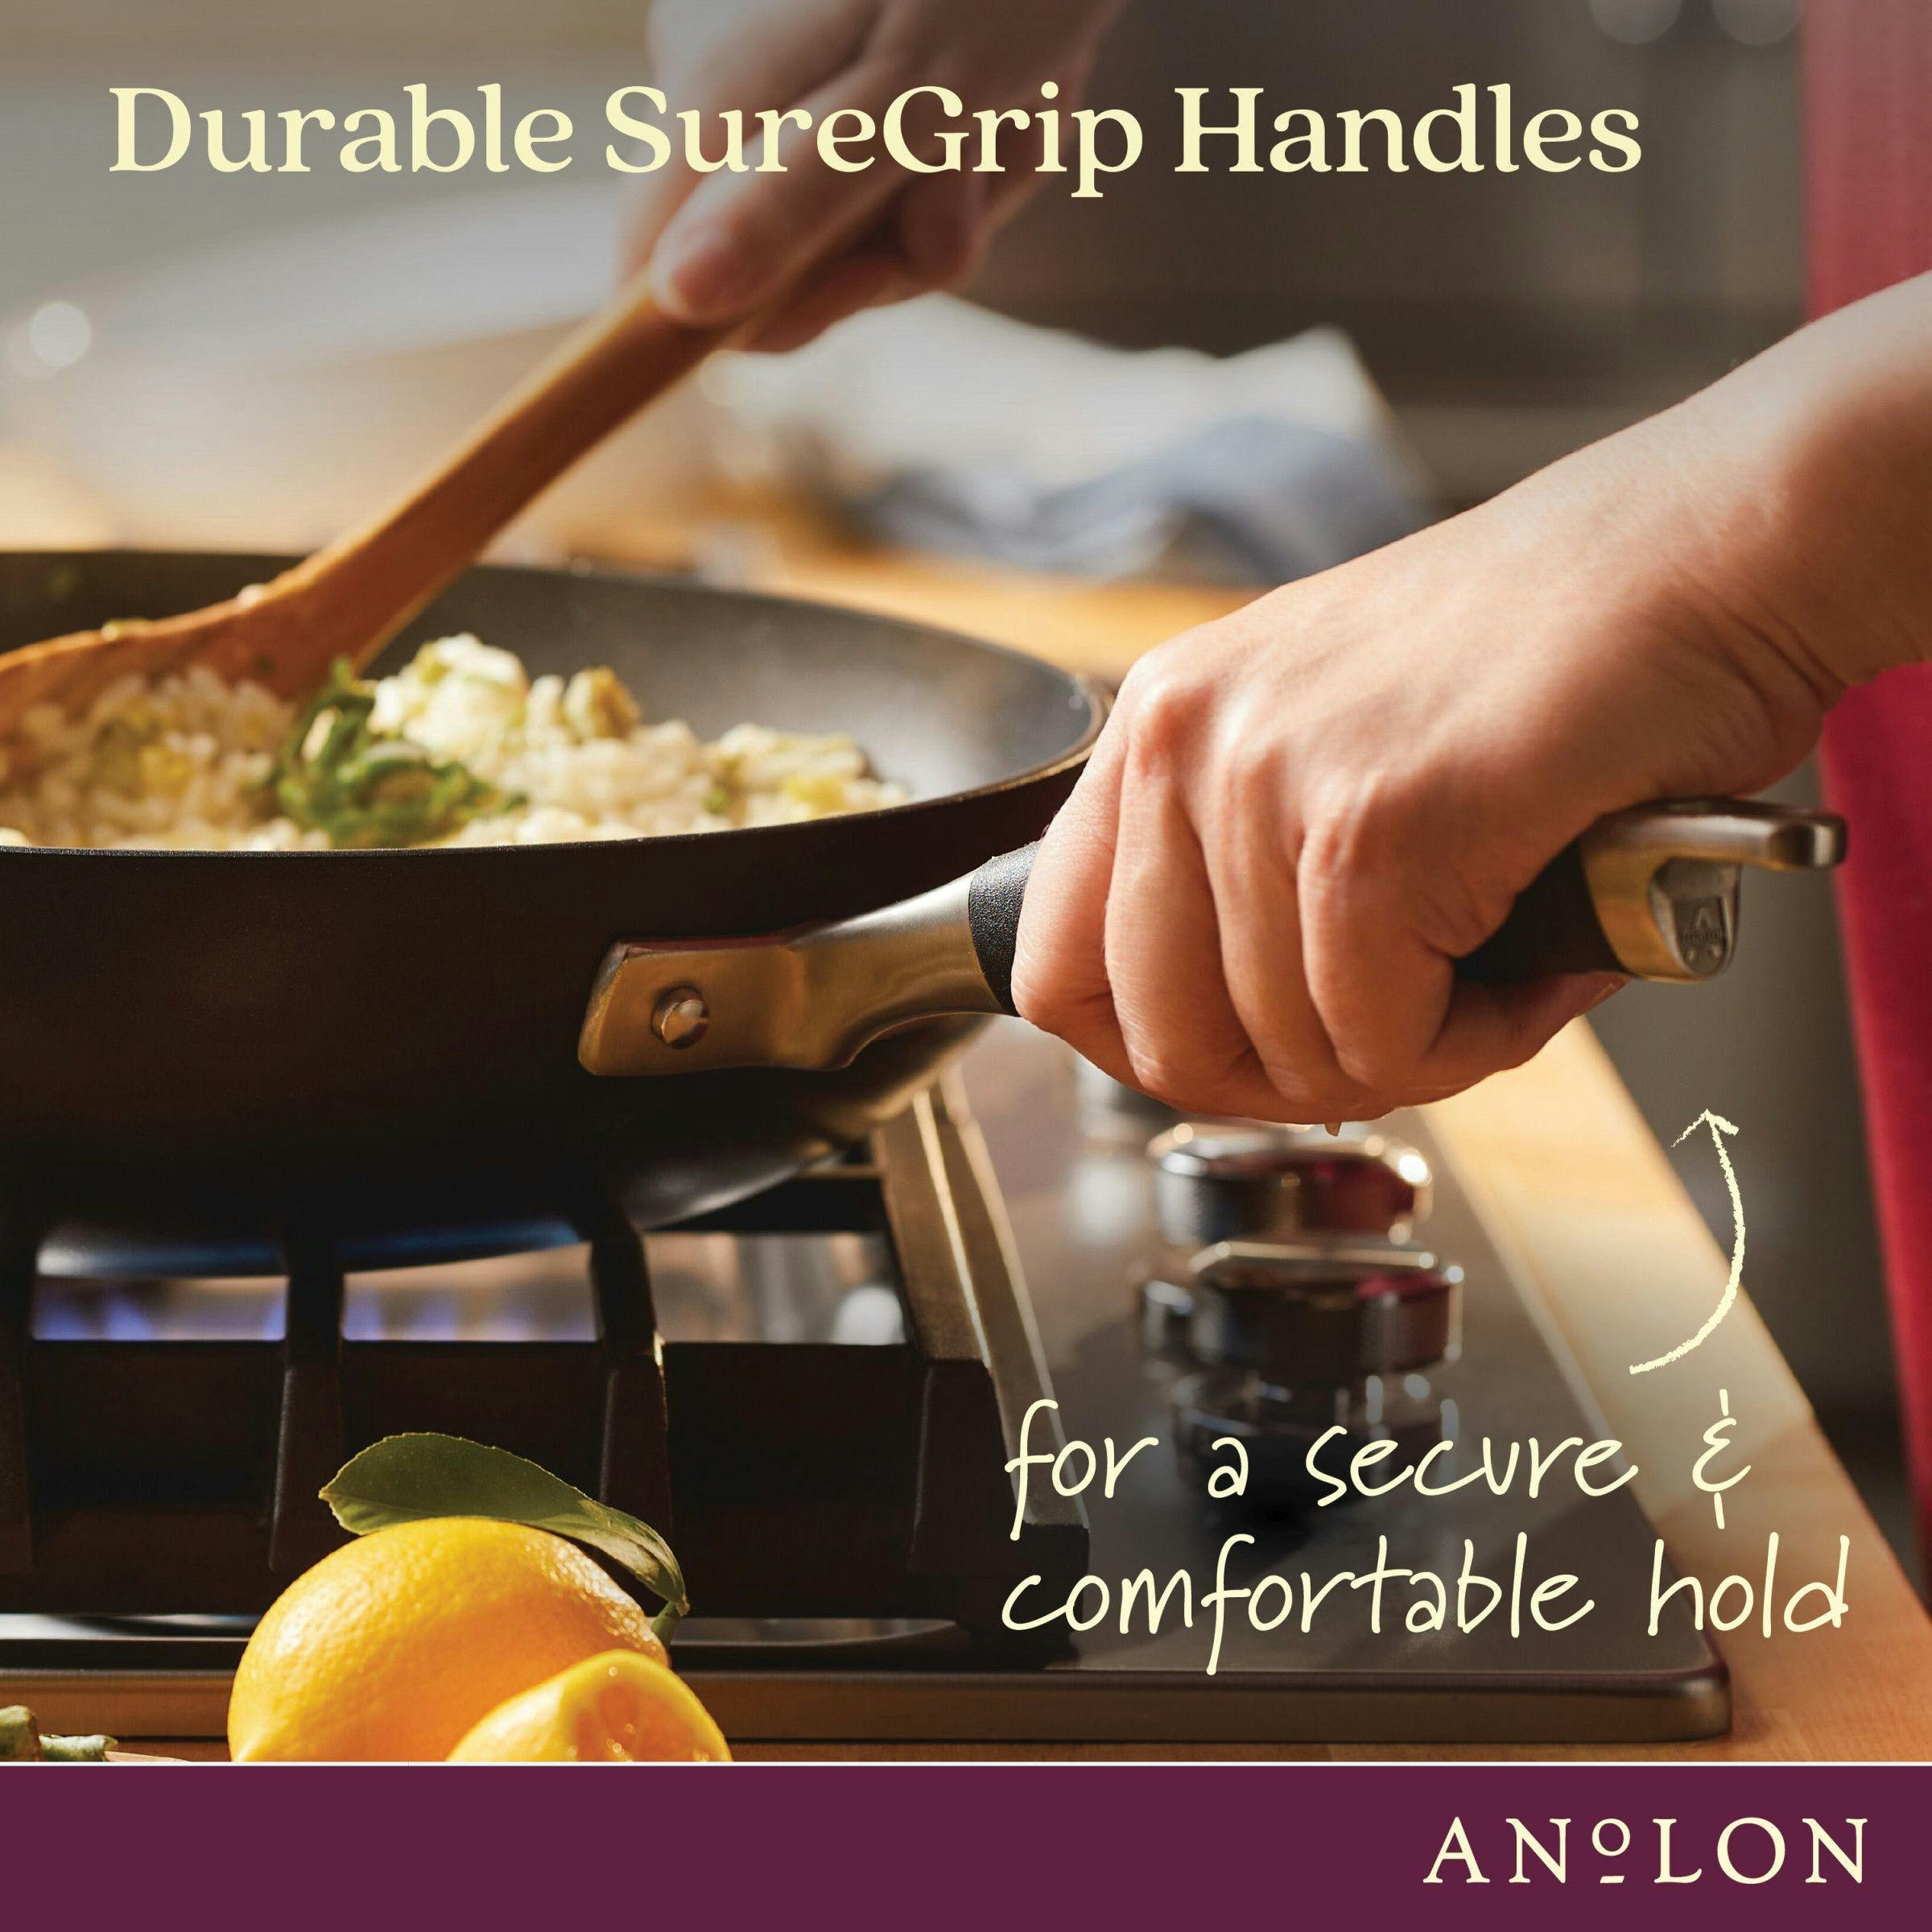 Anolon Advanced Home Hard-Anodized Nonstick Ultimate Pan with Lid